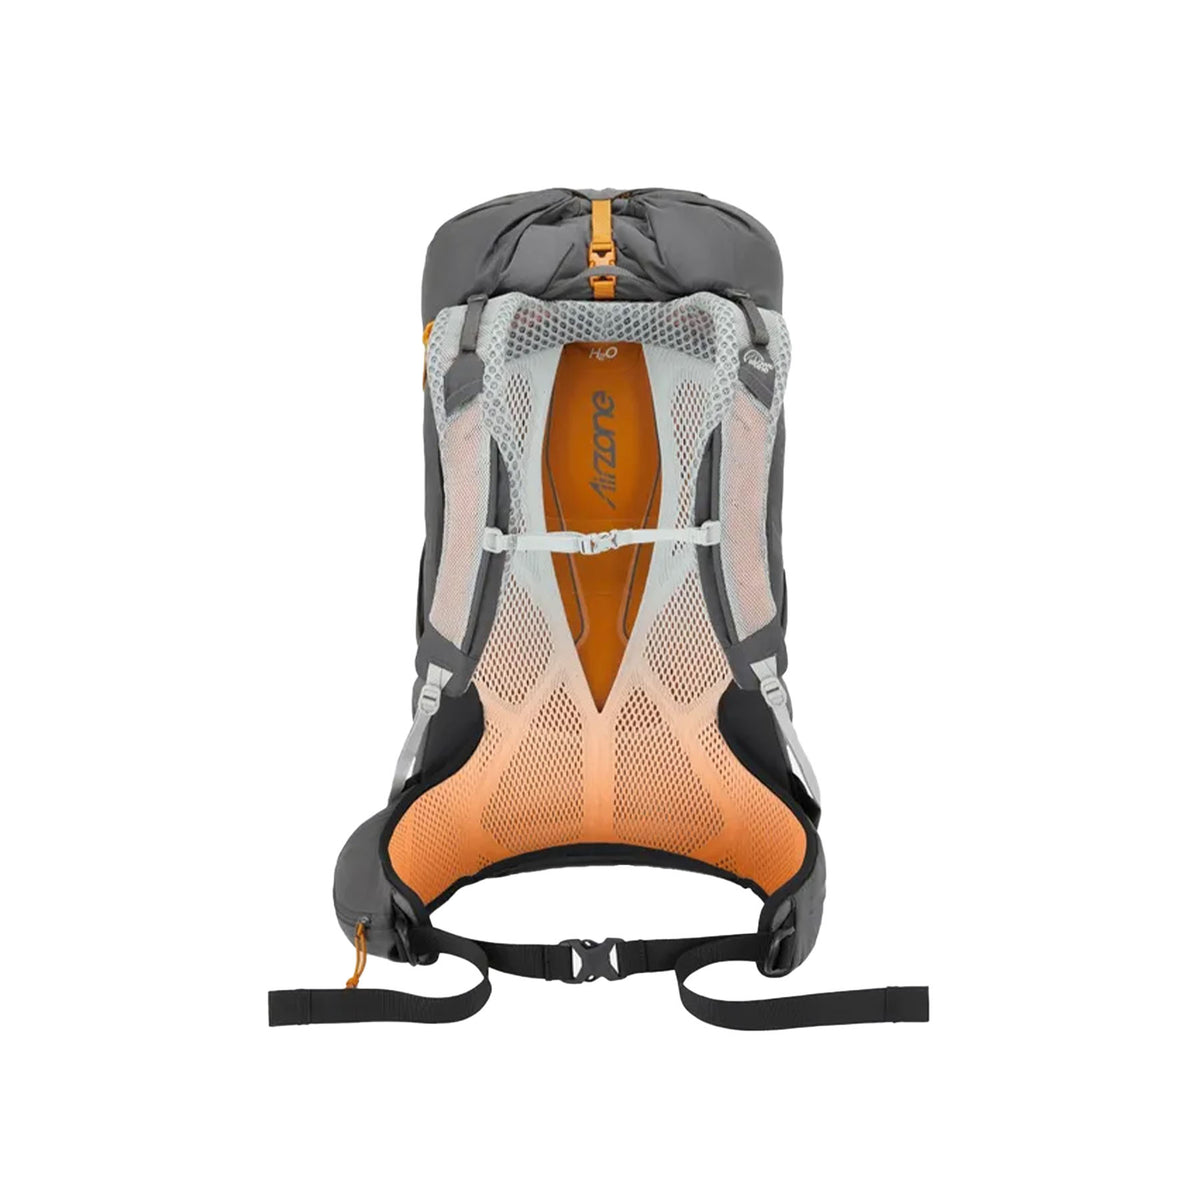 Lowe Alpine Airzone Ultra 26 Backpack 